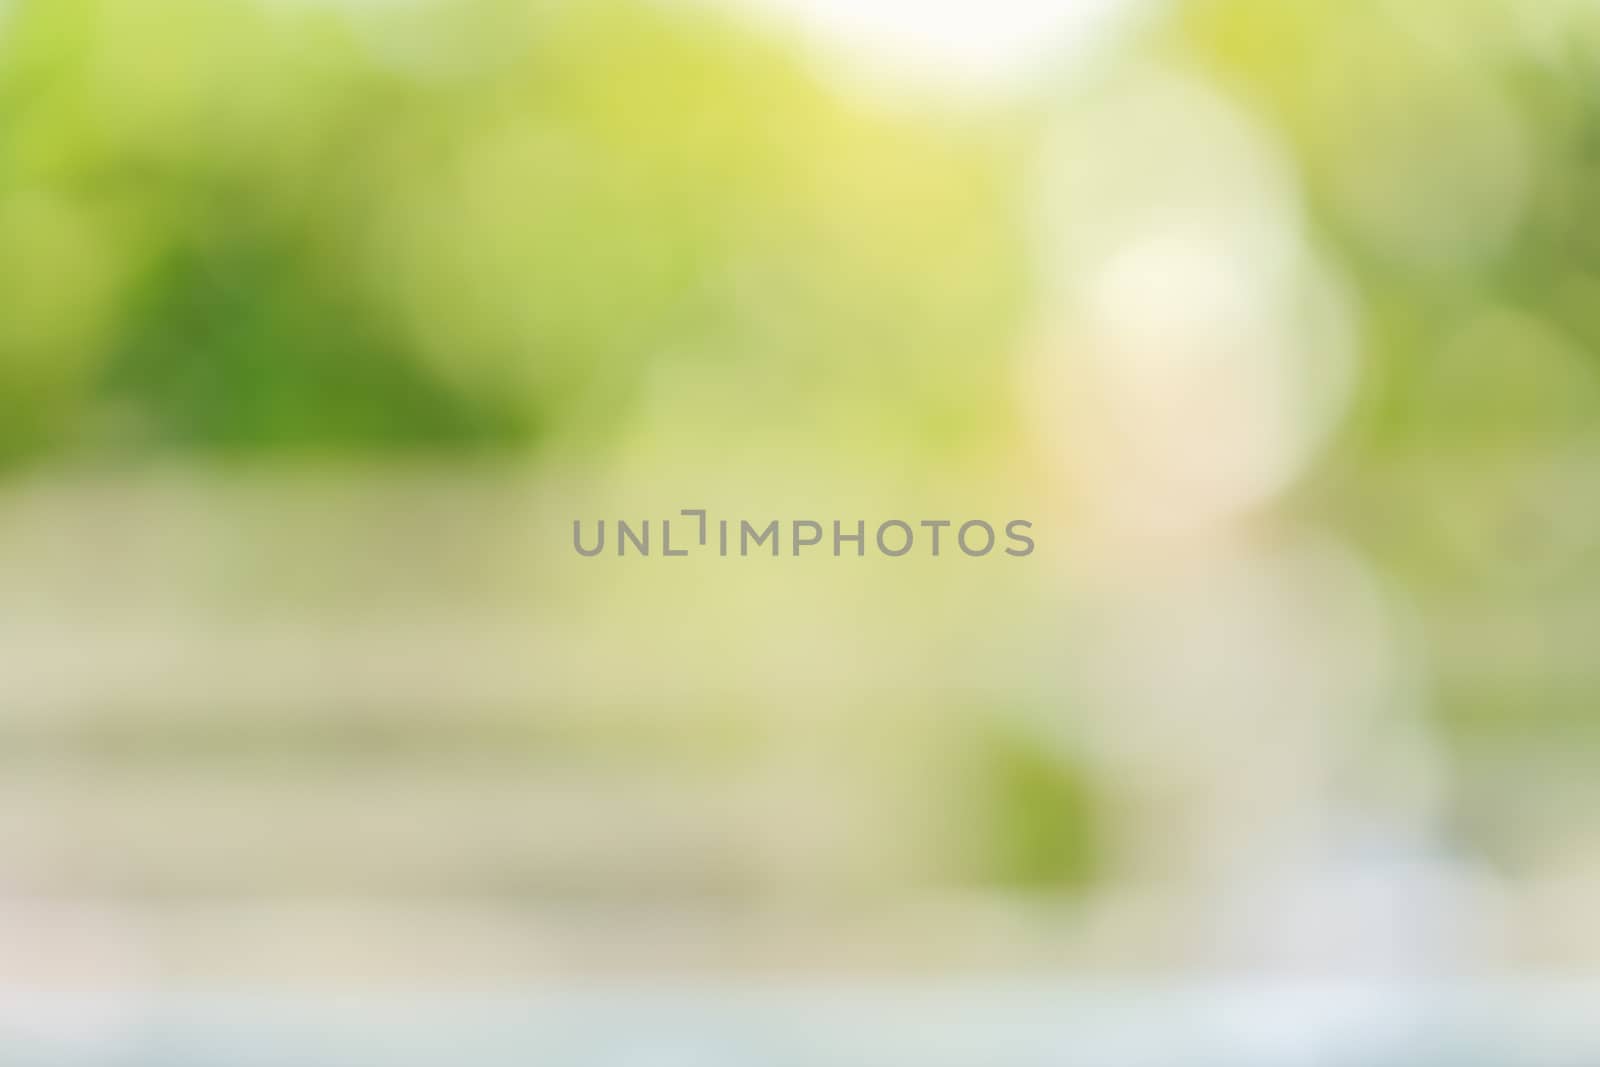 Abstract blurred out of focus and blurred green leaf background under sunlight with bokeh and copy space using as background natural plants landscape, ecology wallpaper concept.